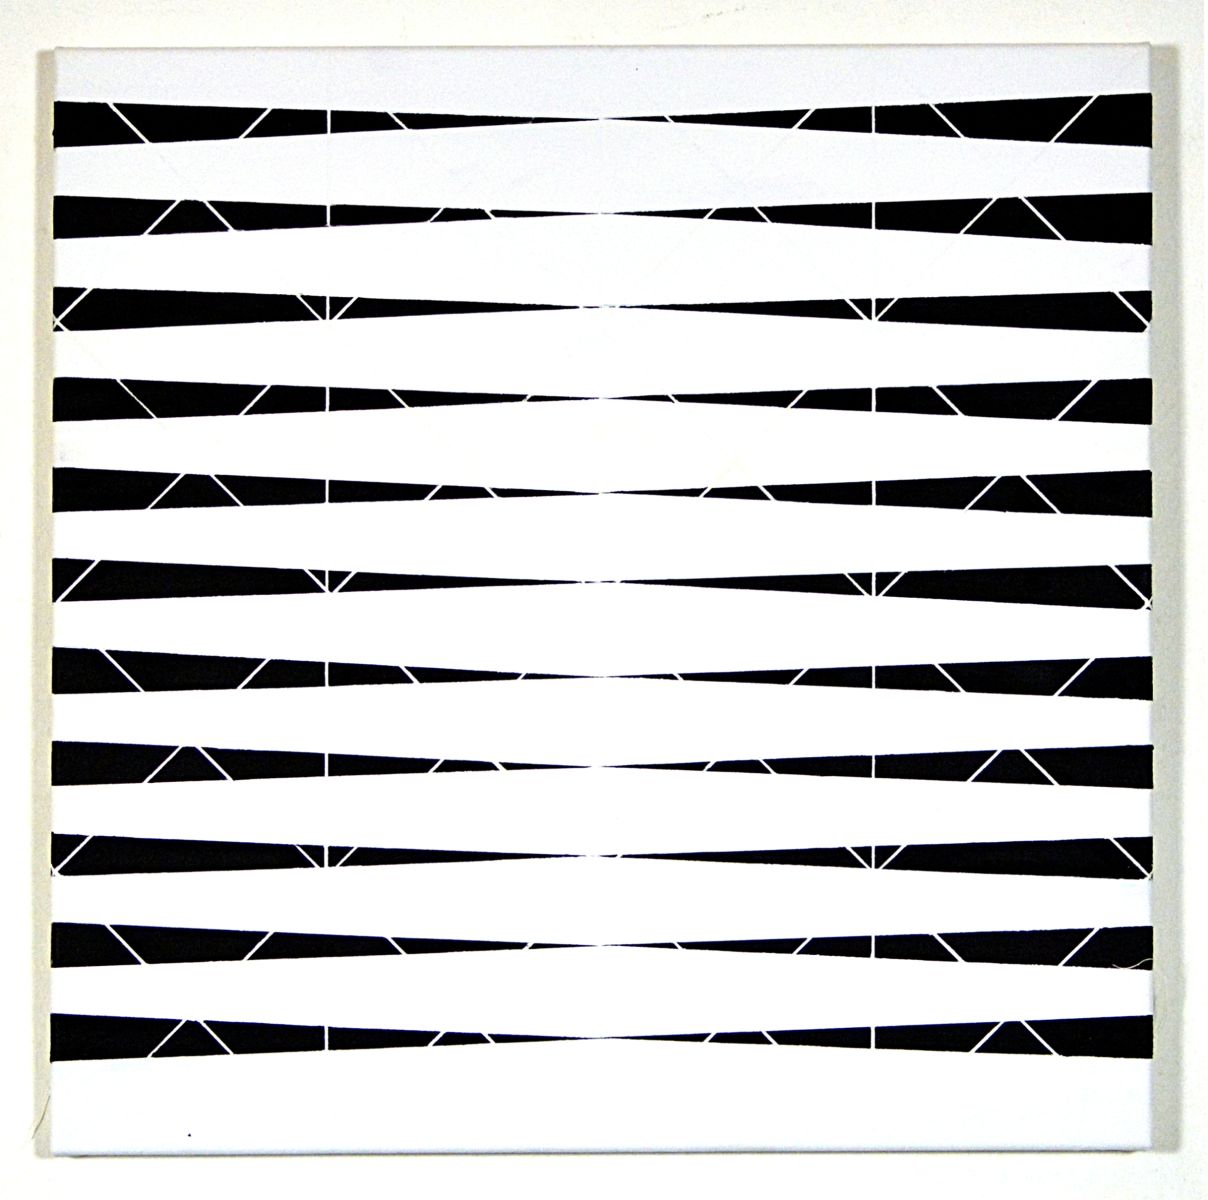 white lines between black and white stripes on canvas-exhibition-lower austria